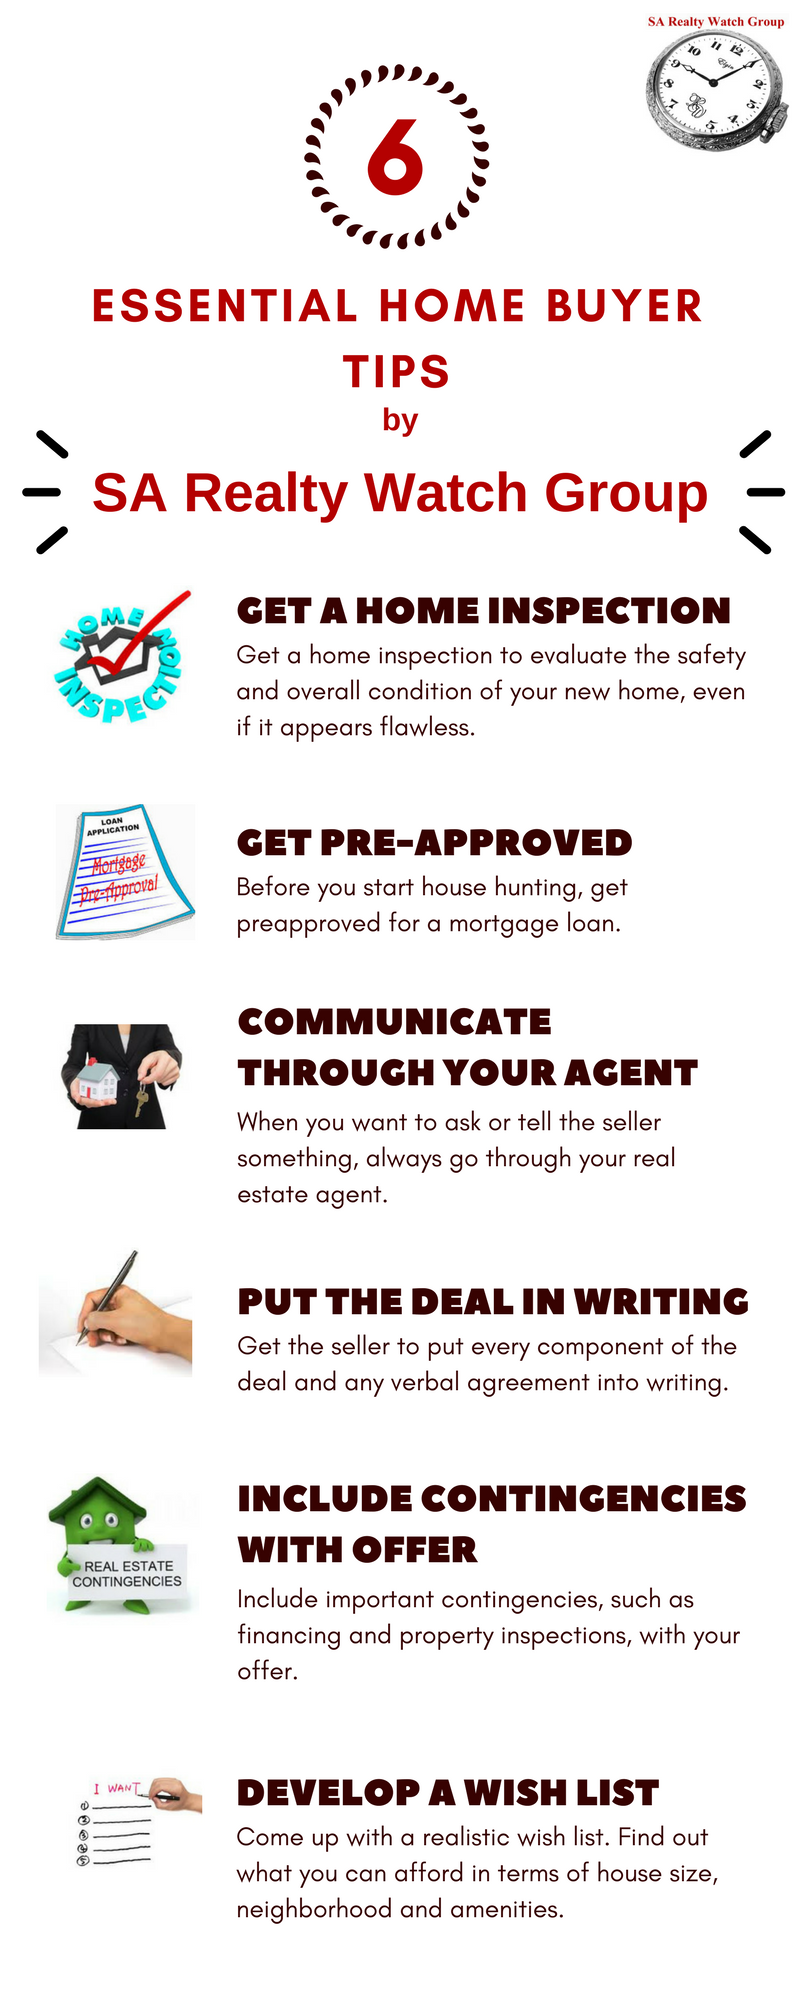 Essential Tips for First Time Home Buyers